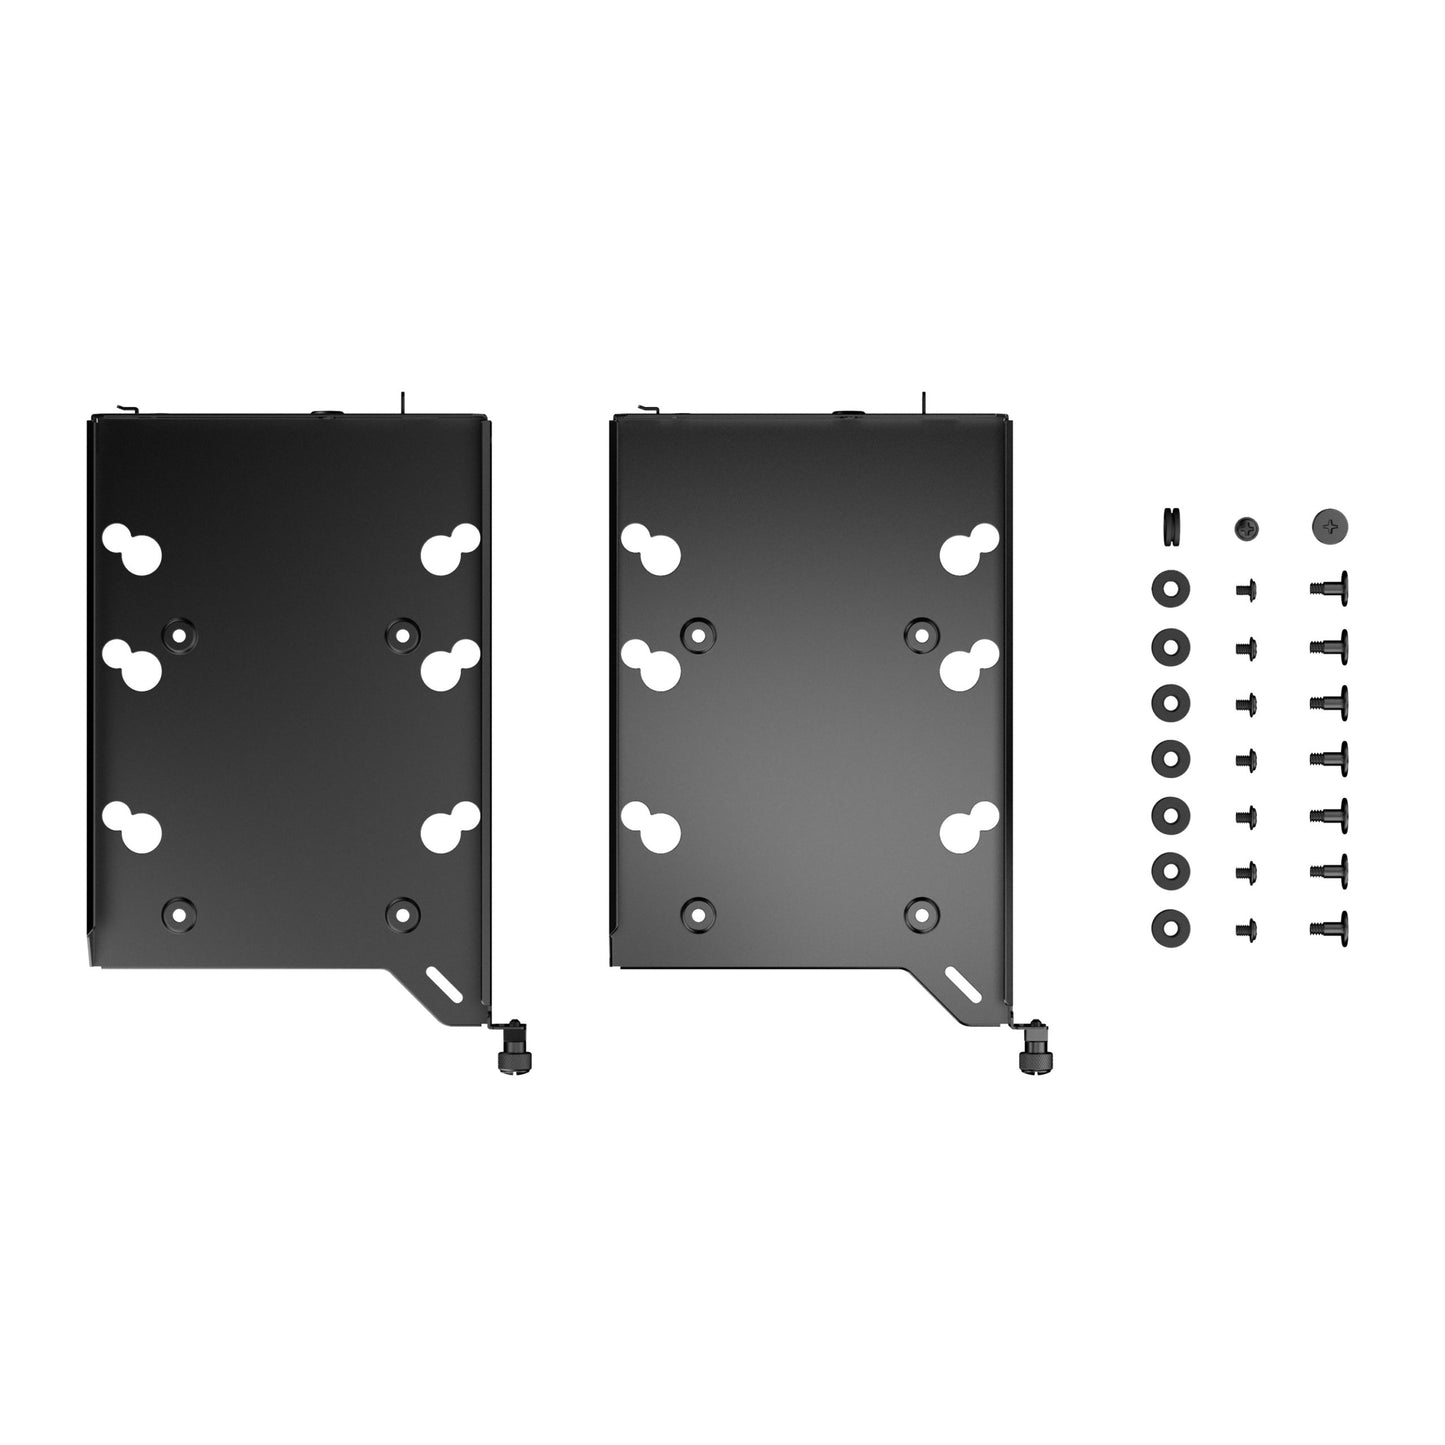 Fractal Design FD-A-TRAY-001 HDD Drive Tray Kit Type-B - Black-ACCESSORIES-Fractal-computerspace